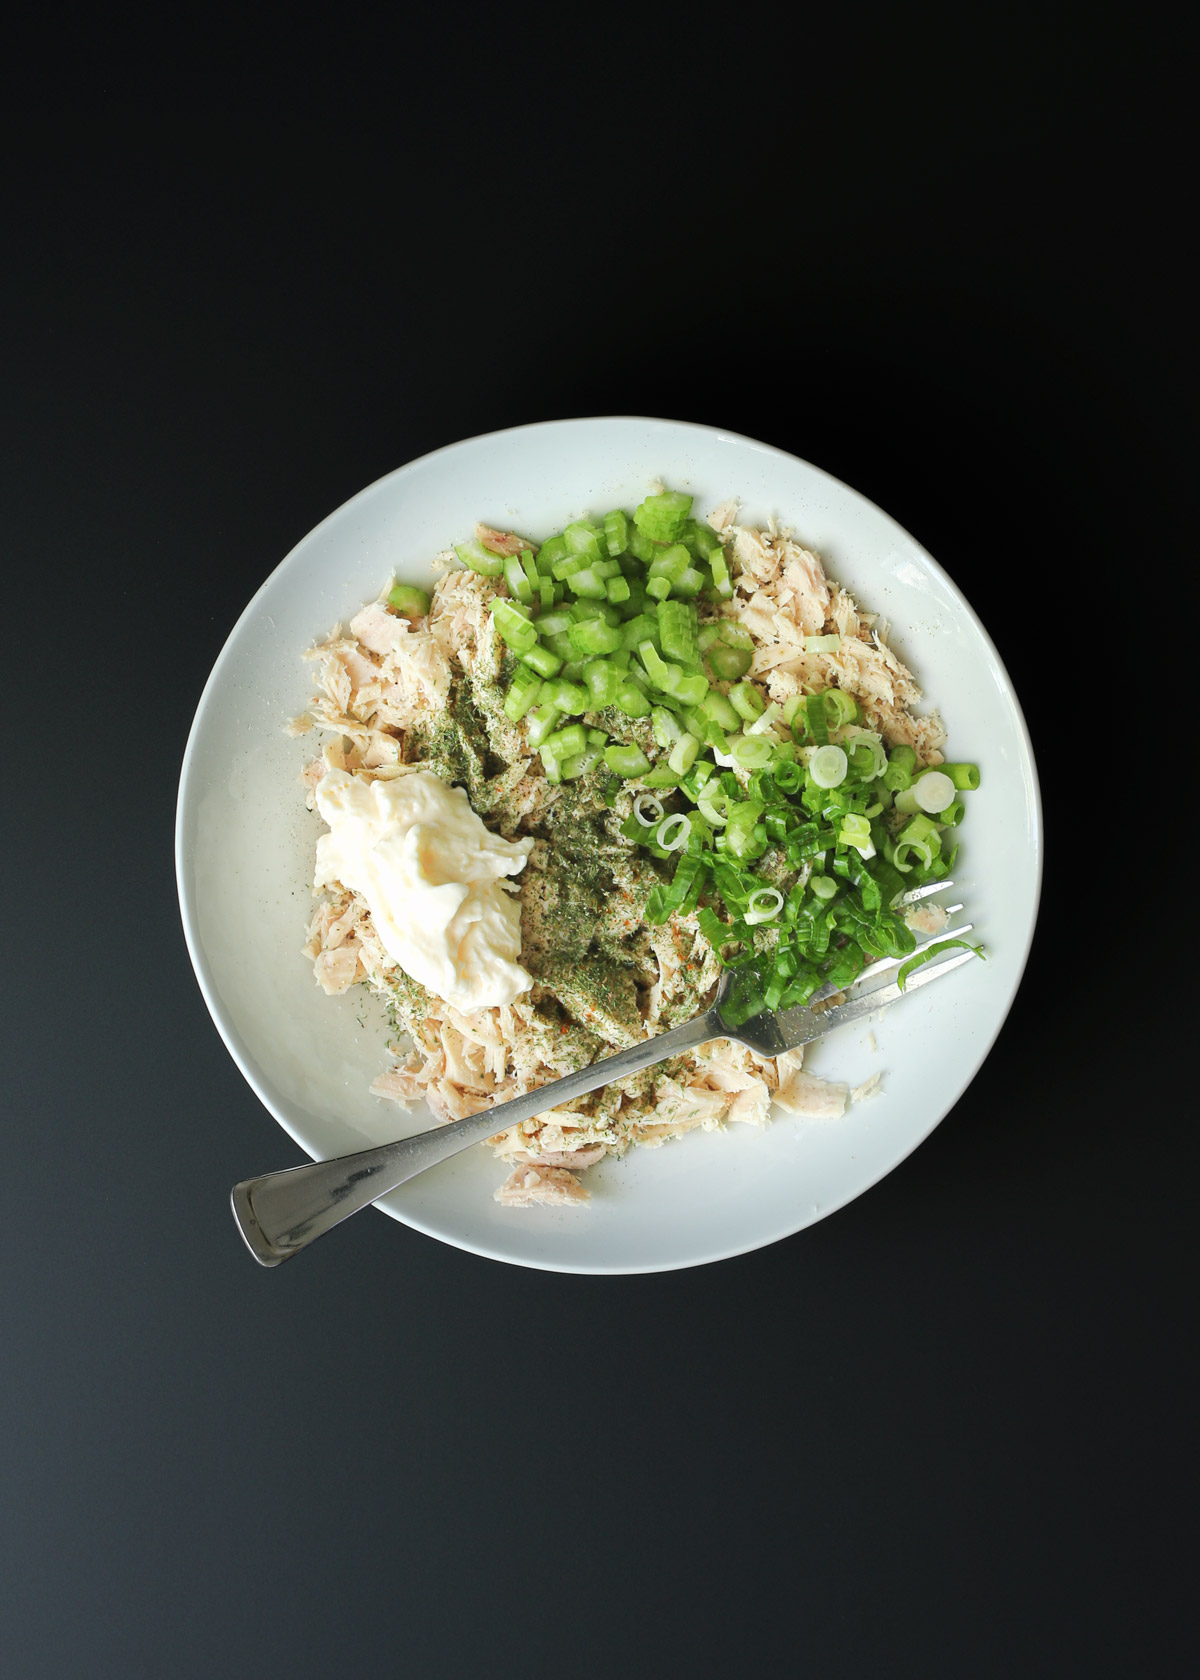 mayo, spices, celery, and onion added to bowl of tuna.